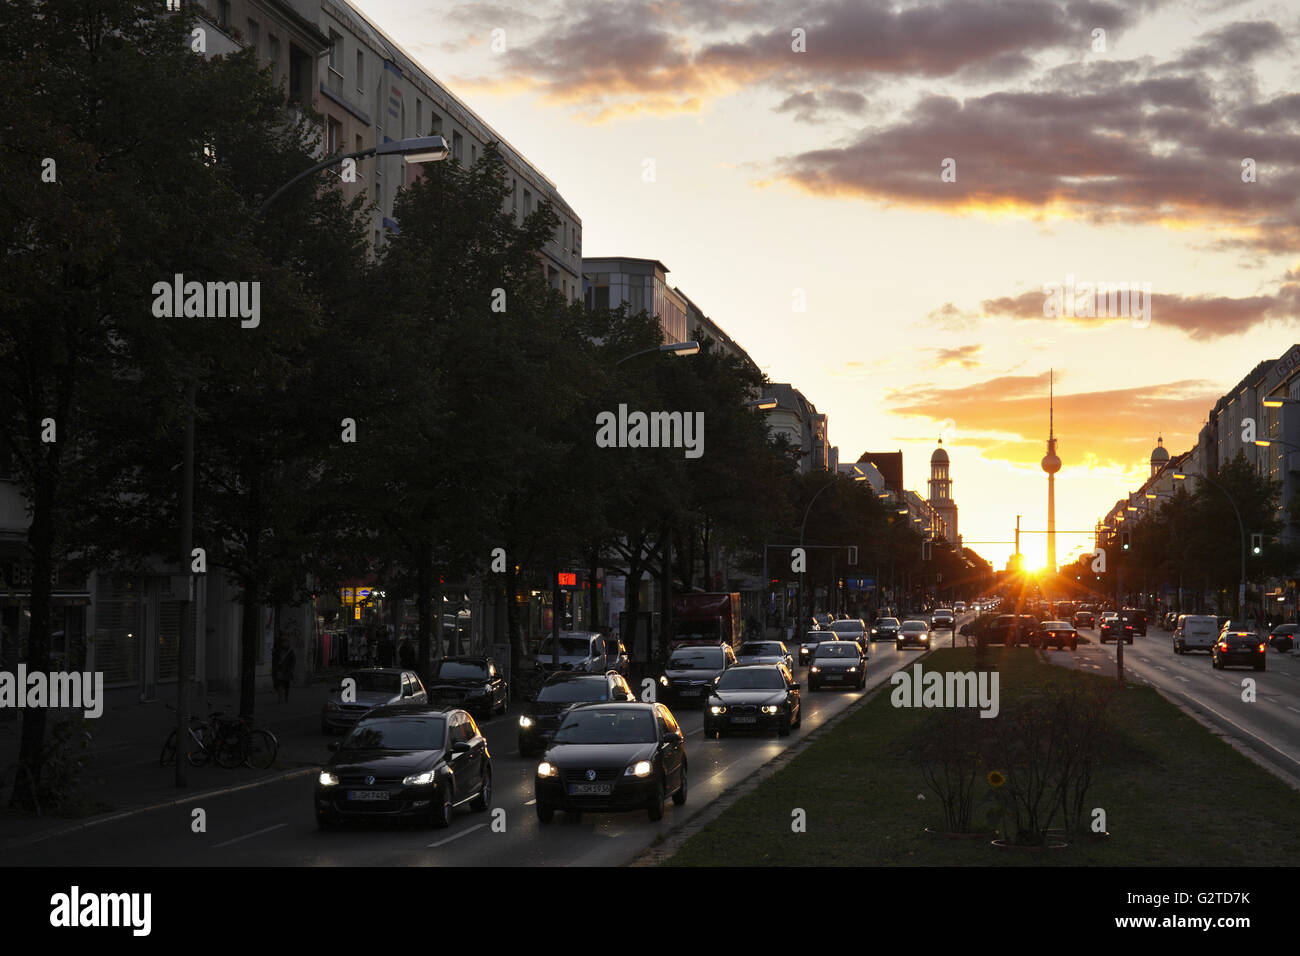 07.09.2015, Berlin, Berlin, Germany - Heavy traffic Karl-Marx-Allee in Berlin-Friedrichshain. 00P150907D244CAROEX.JPG - NOT for SALE in G E R M A N Y, A U S T R I A, S W I T Z E R L A N D [MODEL RELEASE: NOT APPLICABLE, PROPERTY RELEASE: NO, (c) caro photo agency / Muhs, http://www.caro-images.com, info@carofoto.pl - Any use of this picture is subject to royalty!] Stock Photo